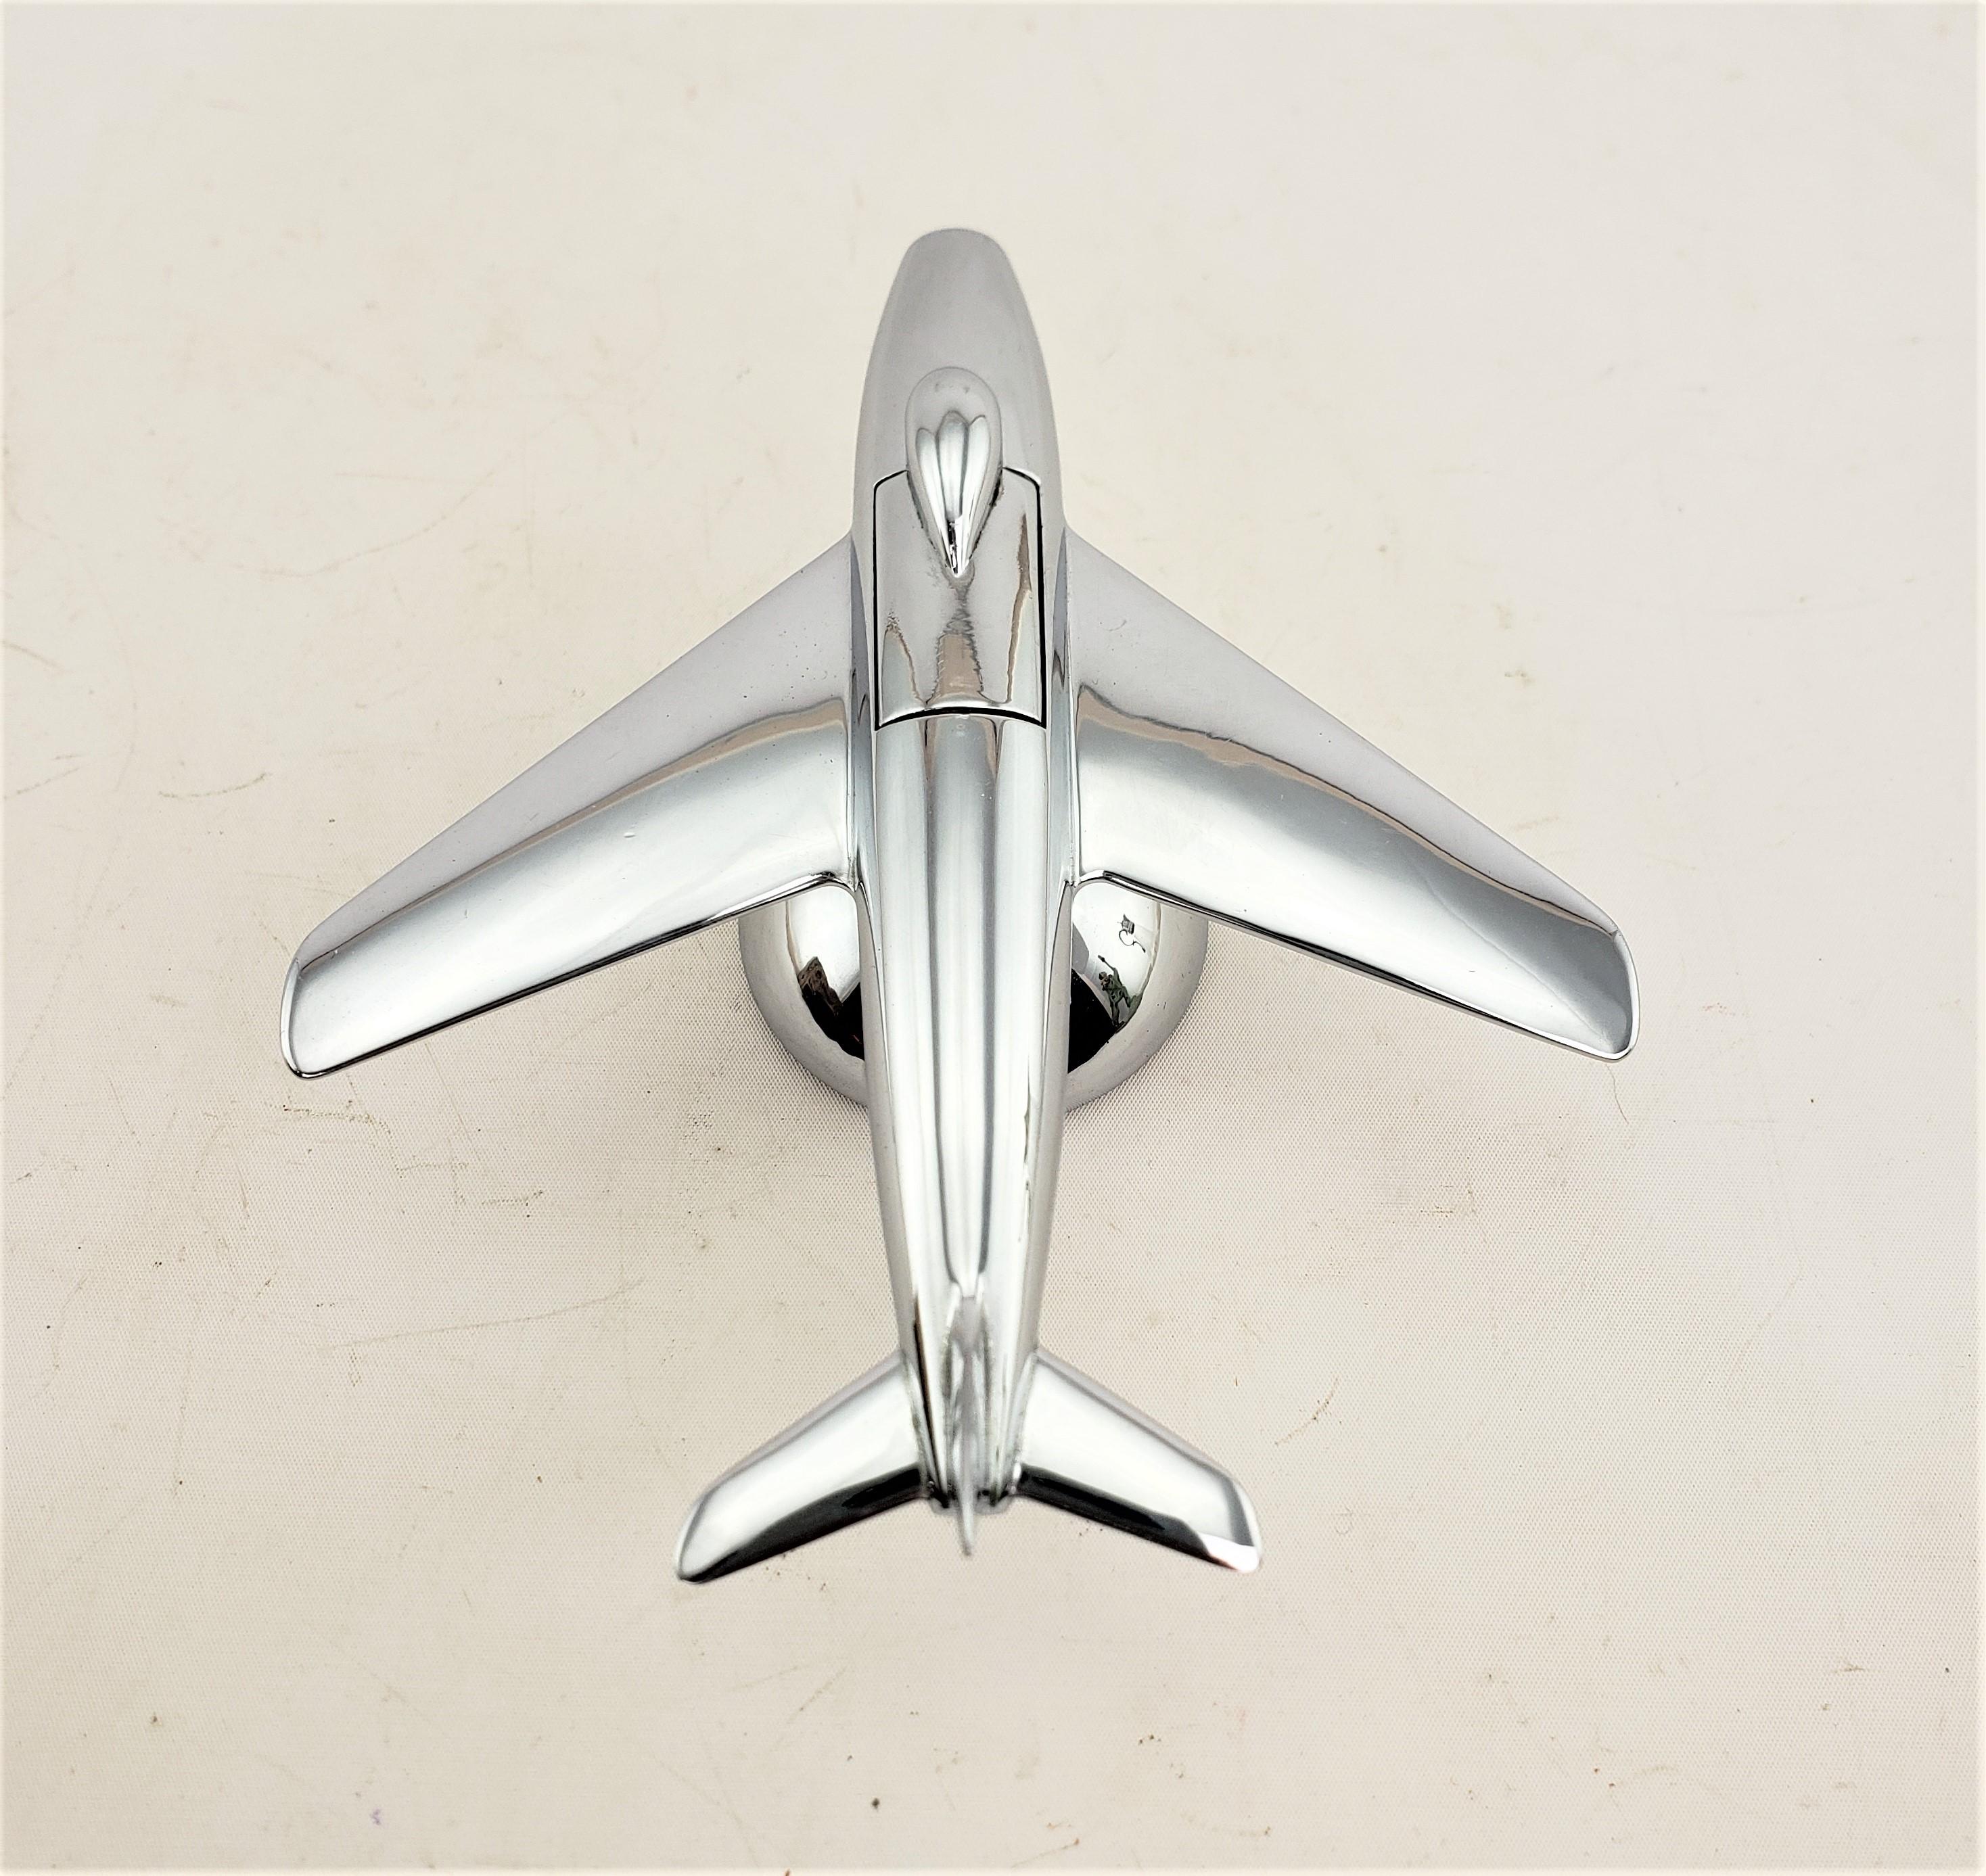 Dunhill Mid-Century Modern Chrome Stylized Sabre Jet Airplane Table Lighter For Sale 1